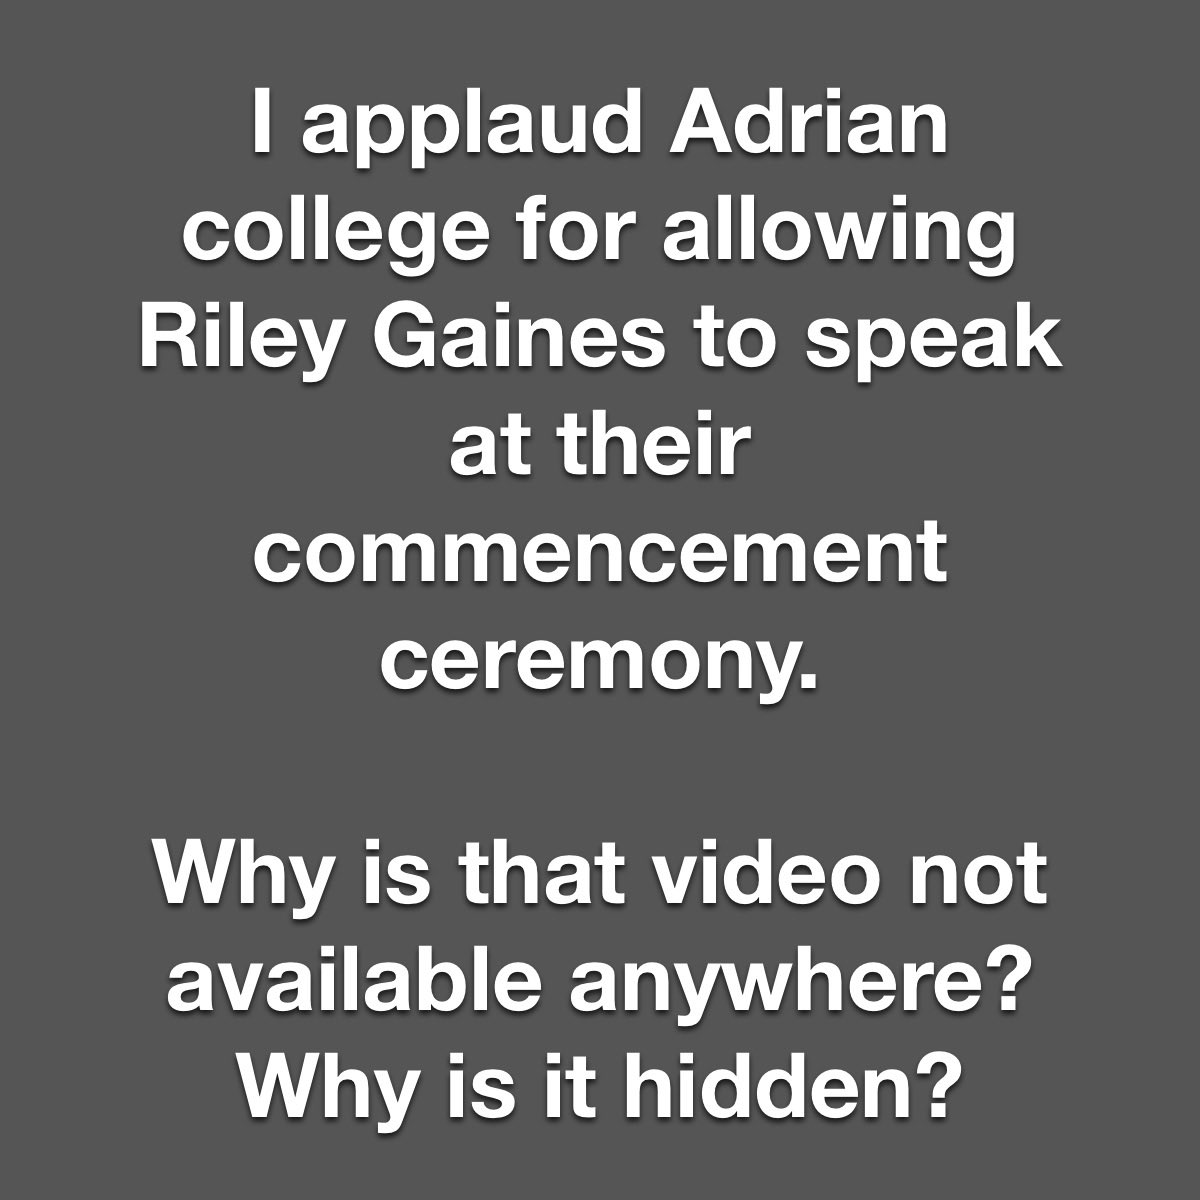 Why is X deleting my message regarding wanting to see the Riley Gaines video from Adrian college? 

@Riley_Gaines_ @elonmusk @AdrianCollege